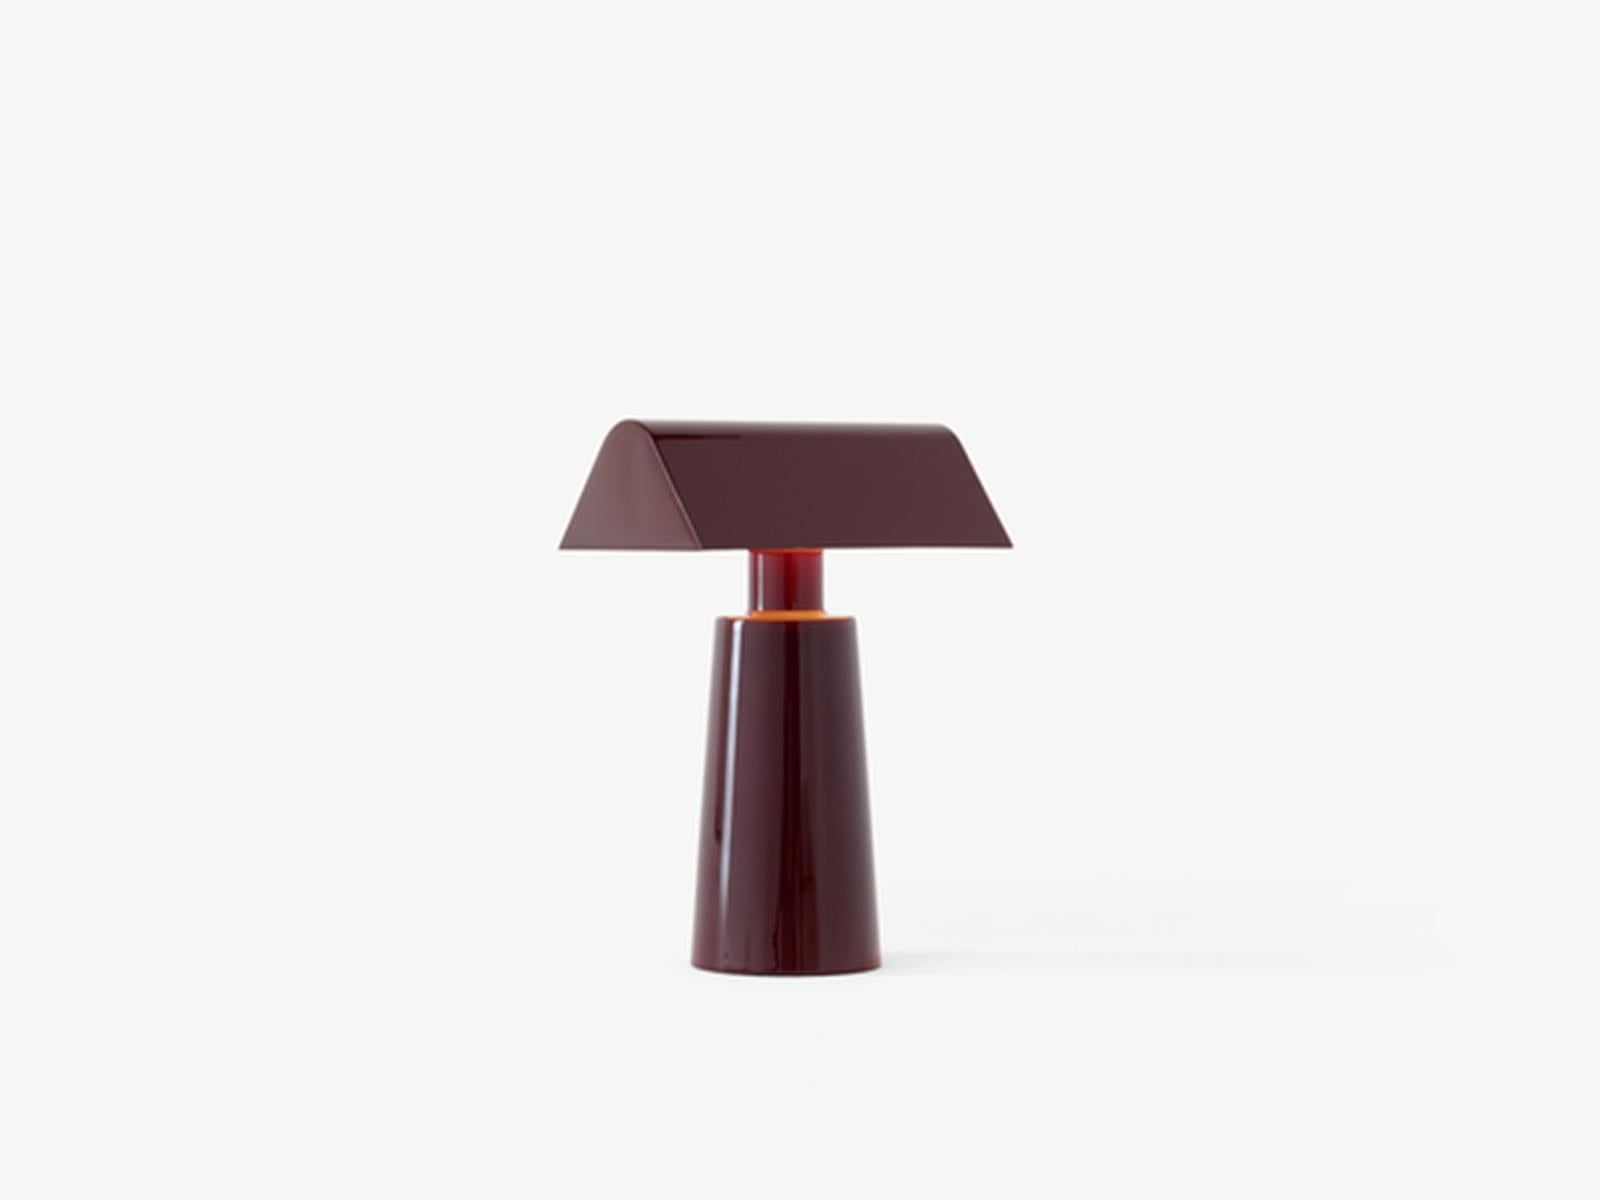 A practical solution to the increasingly blurred boundaries between work and home, the portable Caret reimagines the linear silhouettes of the classic, green-shaded designs – known as 'bankers lamps' – found in historic libraries. 
Made entirely